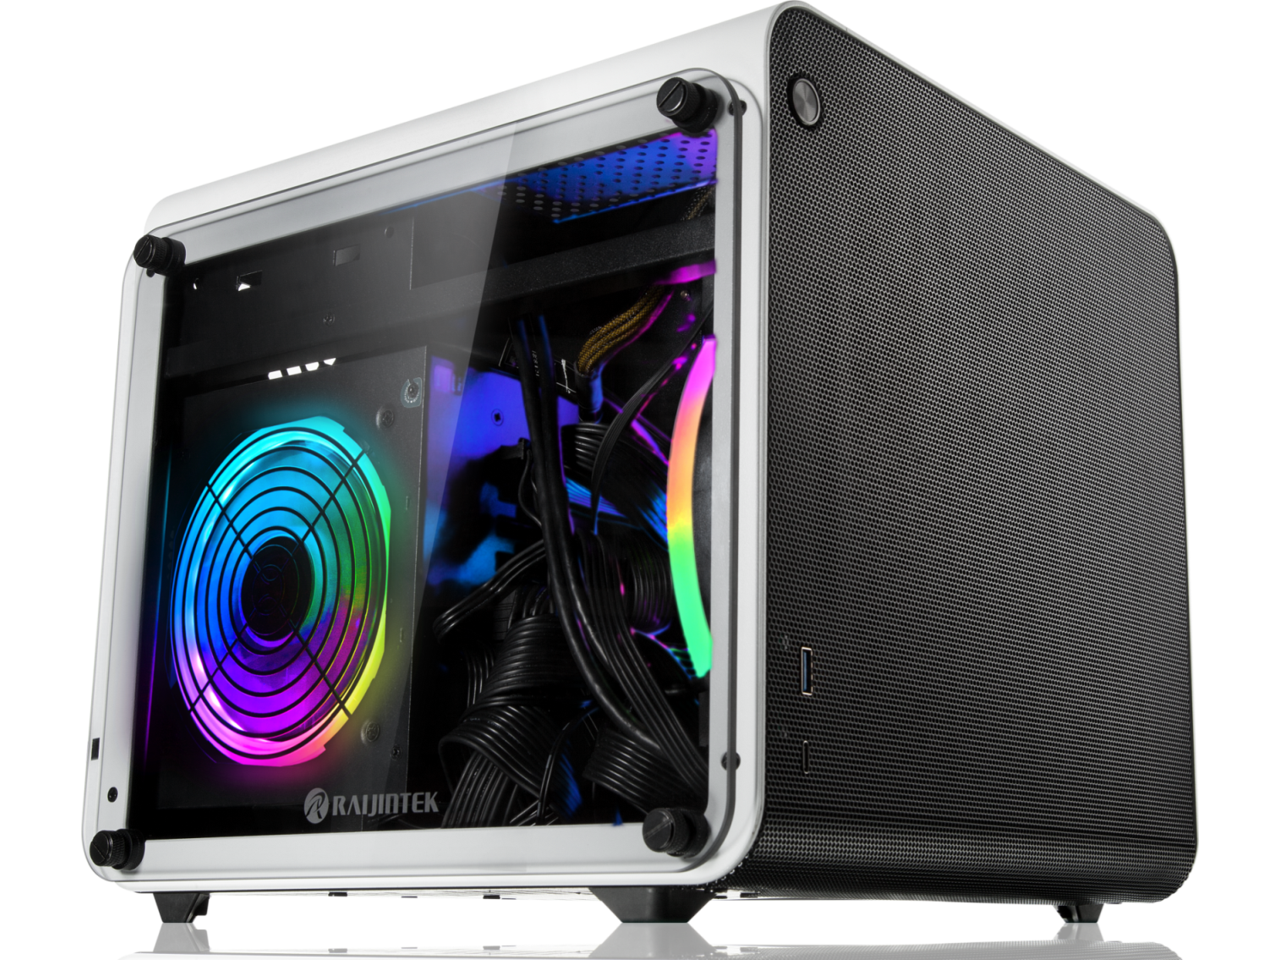 METIS EVO RED TGS, an Alu. ITX case with tempered glass, is designed to fulfill the smallest case built with ultra high air flow to solve all thermal issue of SFF chassis, 200mm fan option at front.